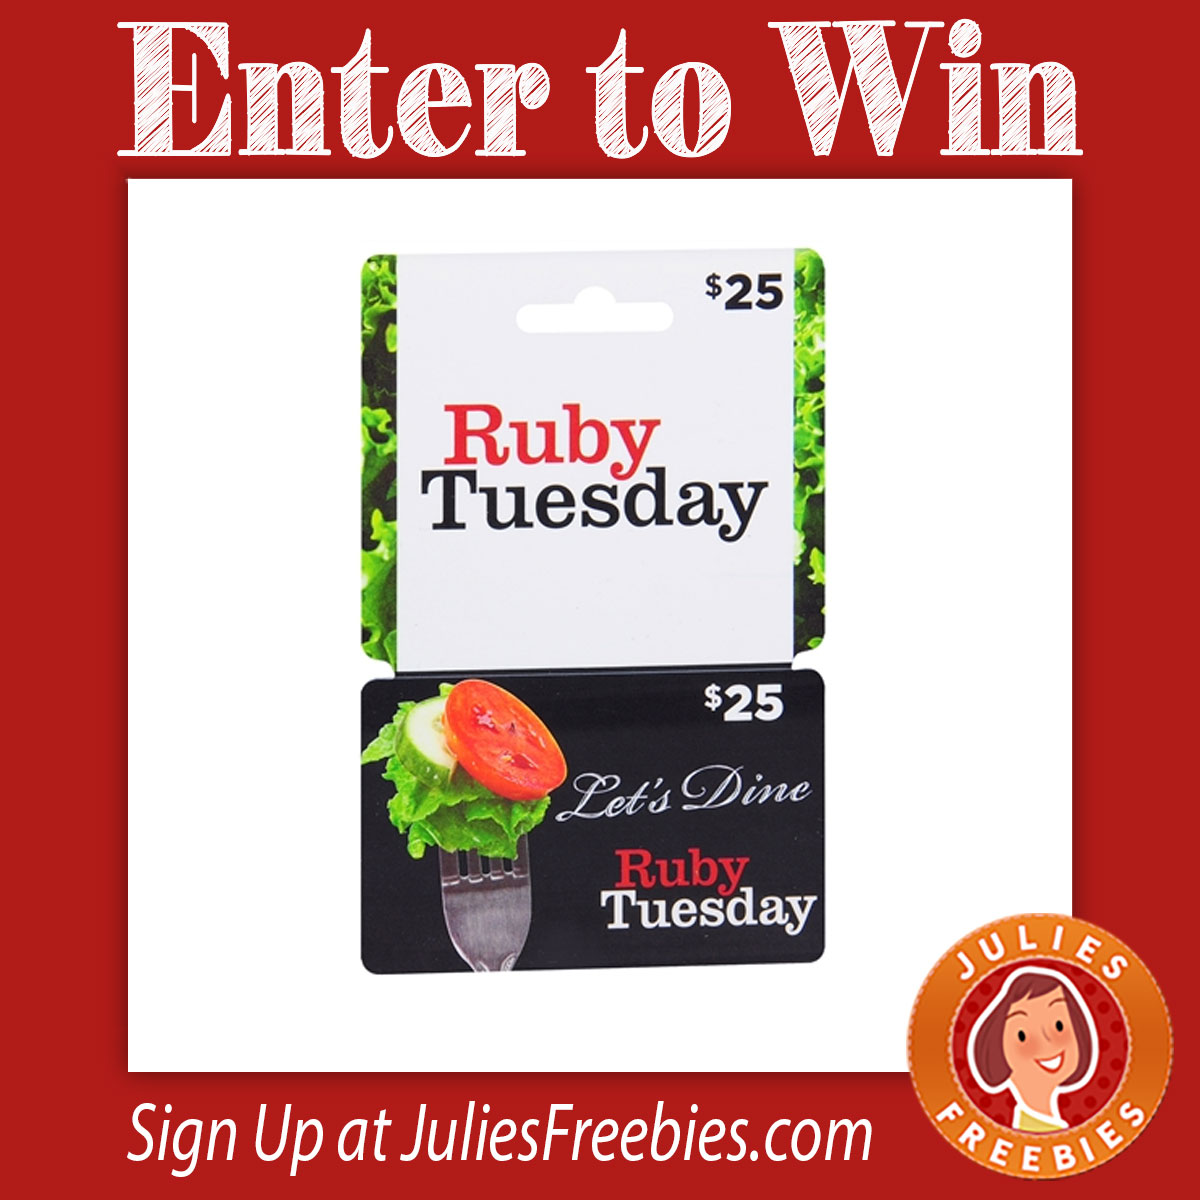 5) Grand Prizes - 12 $100.00 Ruby Tuesday Gift Cards. 